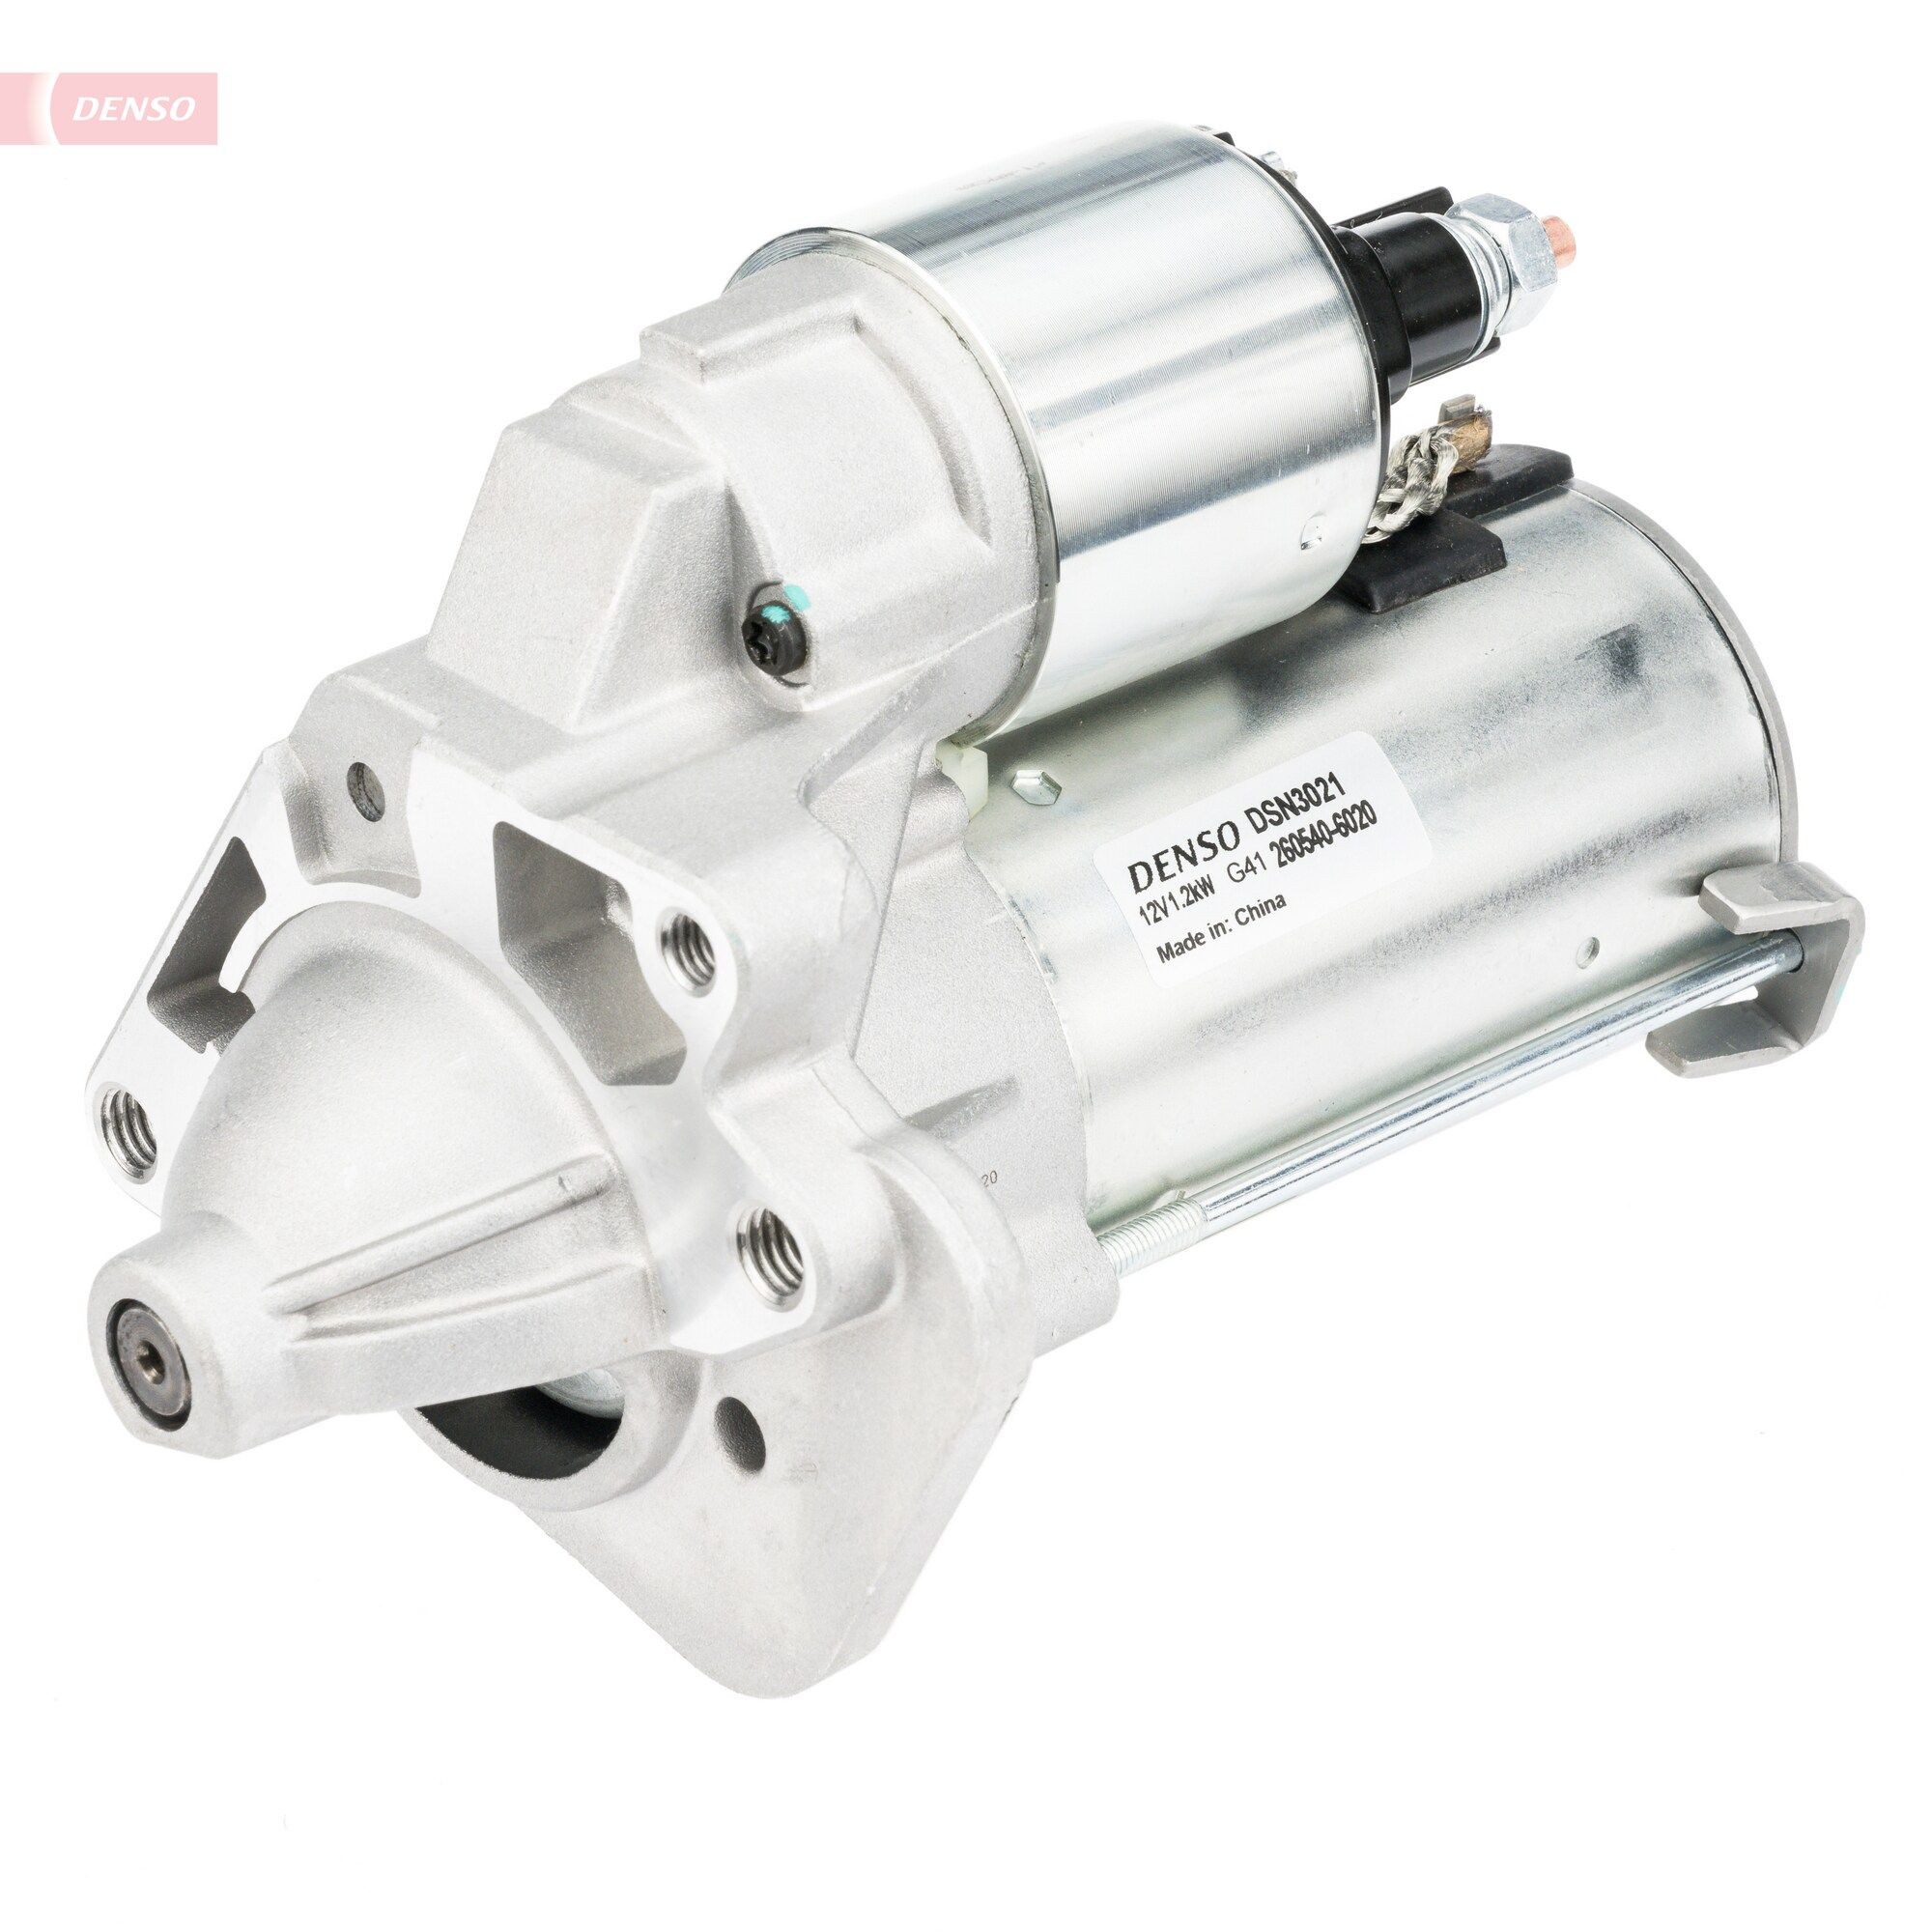 DENSO DSN3021 Starter motor NISSAN experience and price